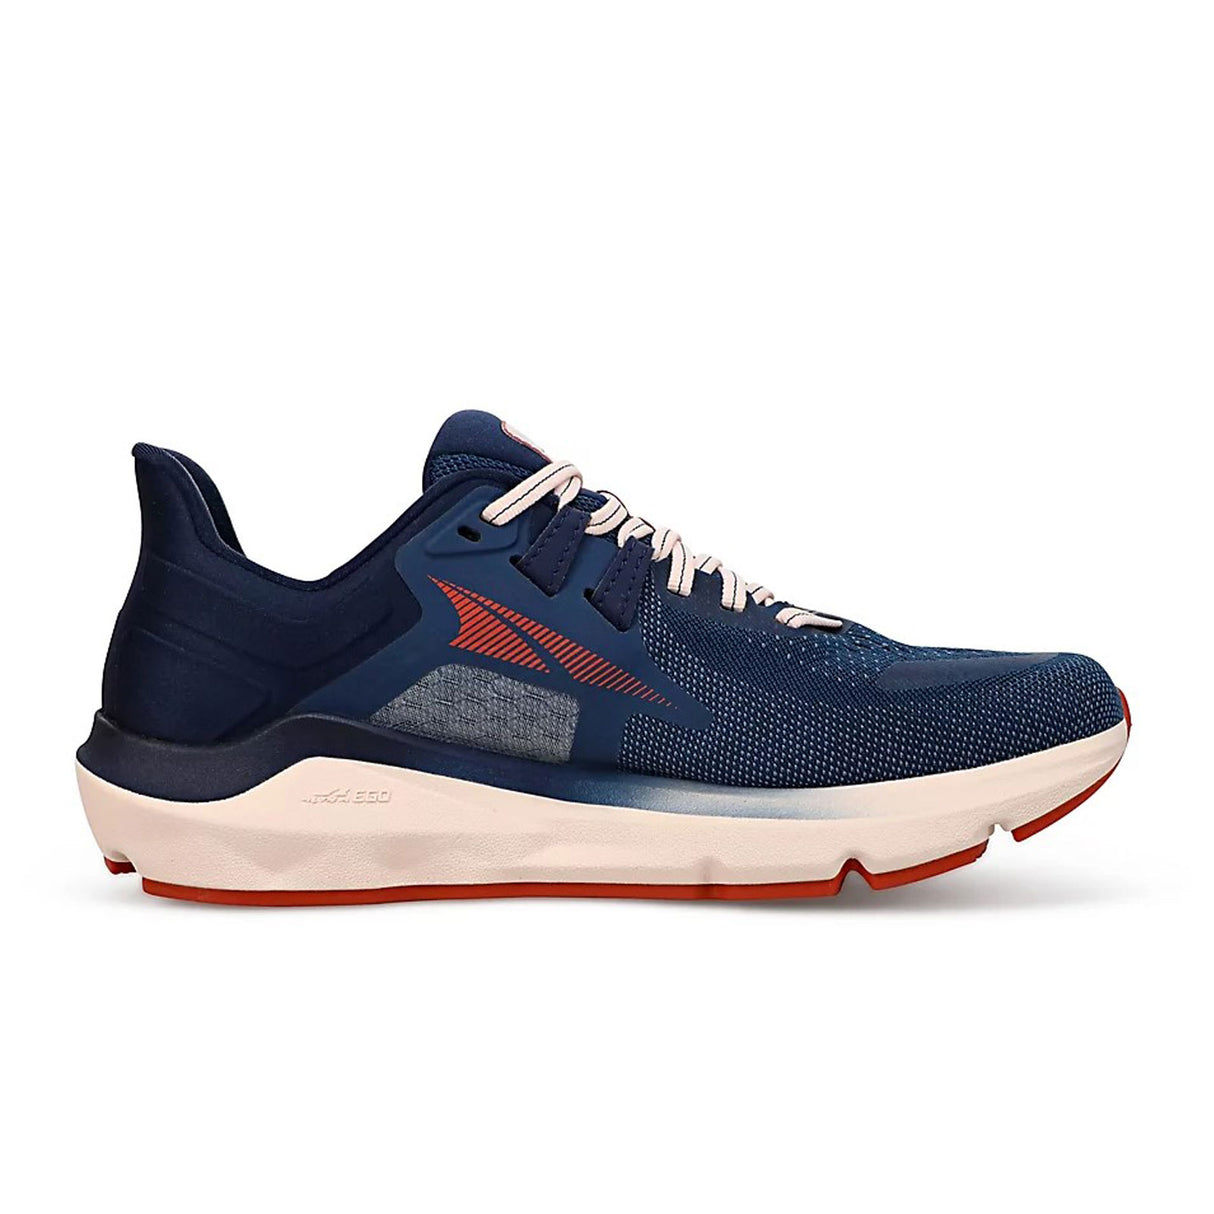 Altra Provision 6 (Women) - Navy Athletic - Walking - The Heel Shoe Fitters